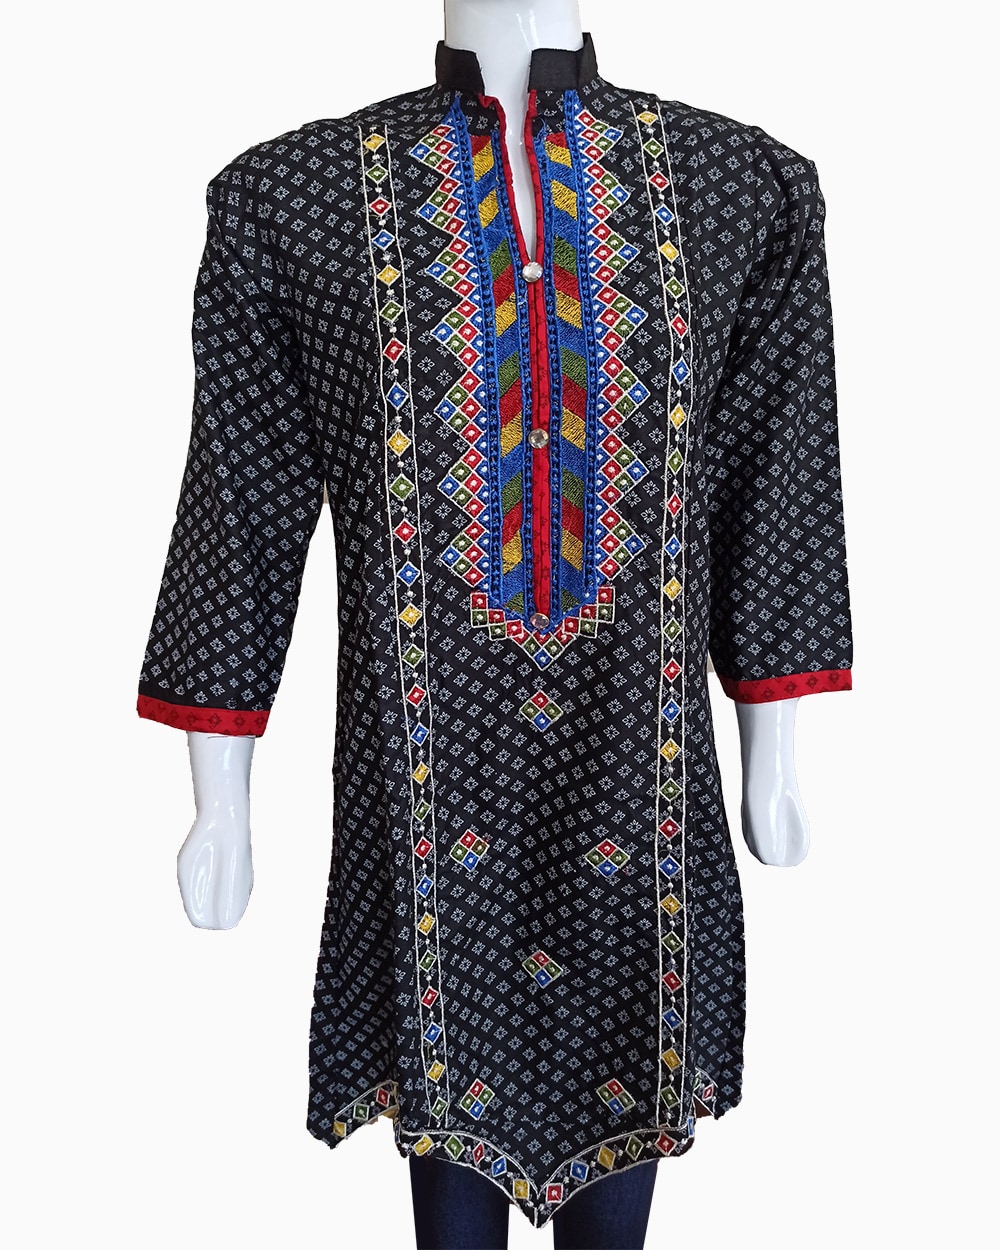 Balochi cultural embroidered shirt-all over embroidered shirt-buy cultural fashion online-black with contrast embroidered neckline (5)